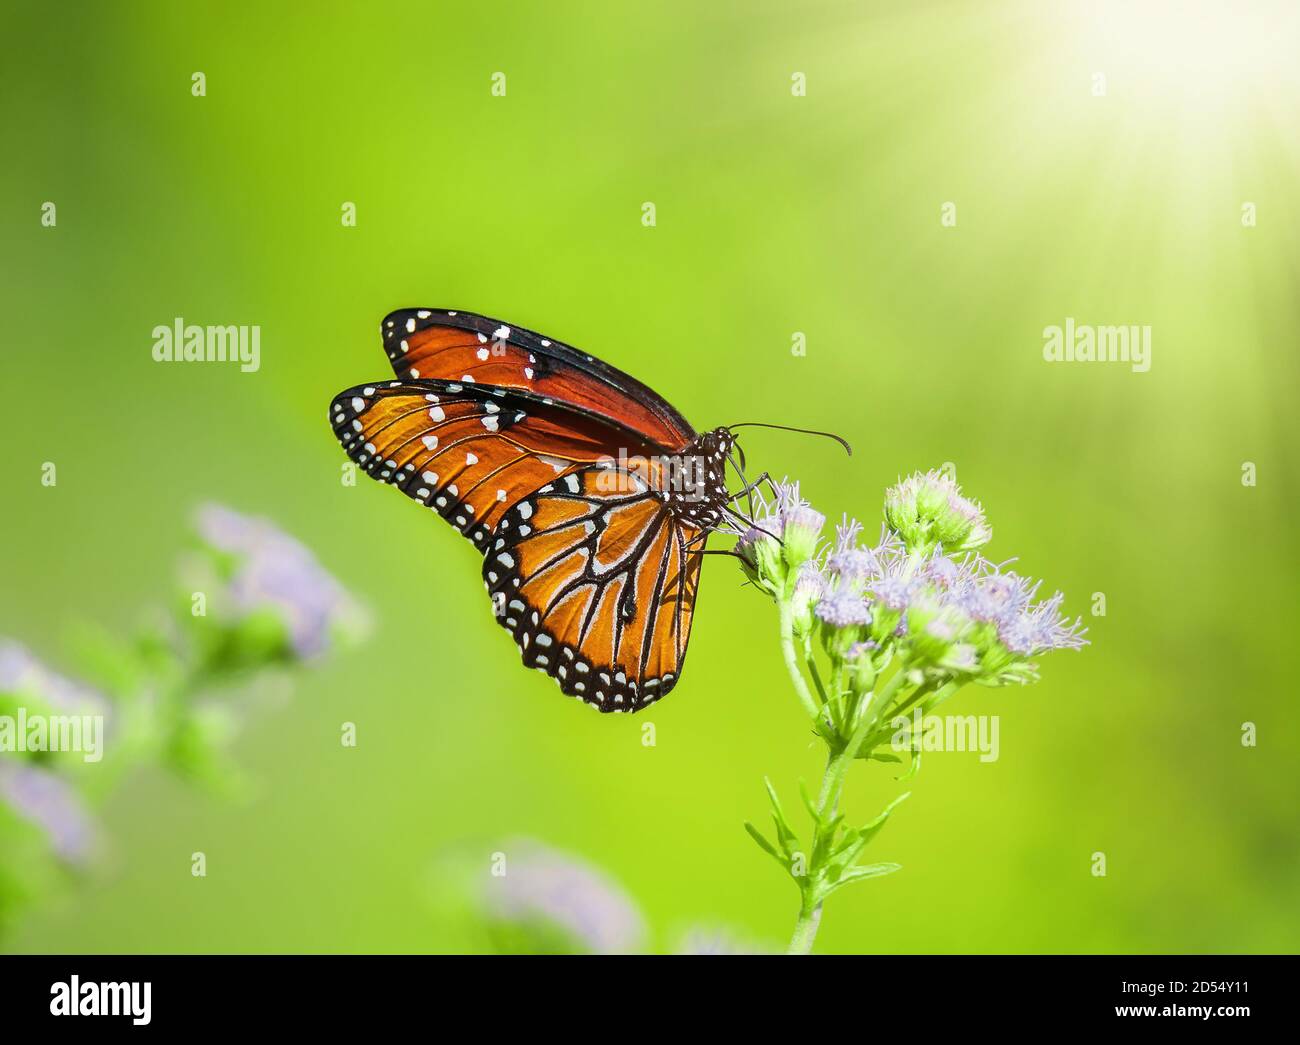 Queen butterfly (Danaus gilippus) feeding on Blue Mistflowers (Conoclinium greggii) on a sunny day. Natural green background with copy space. Stock Photo